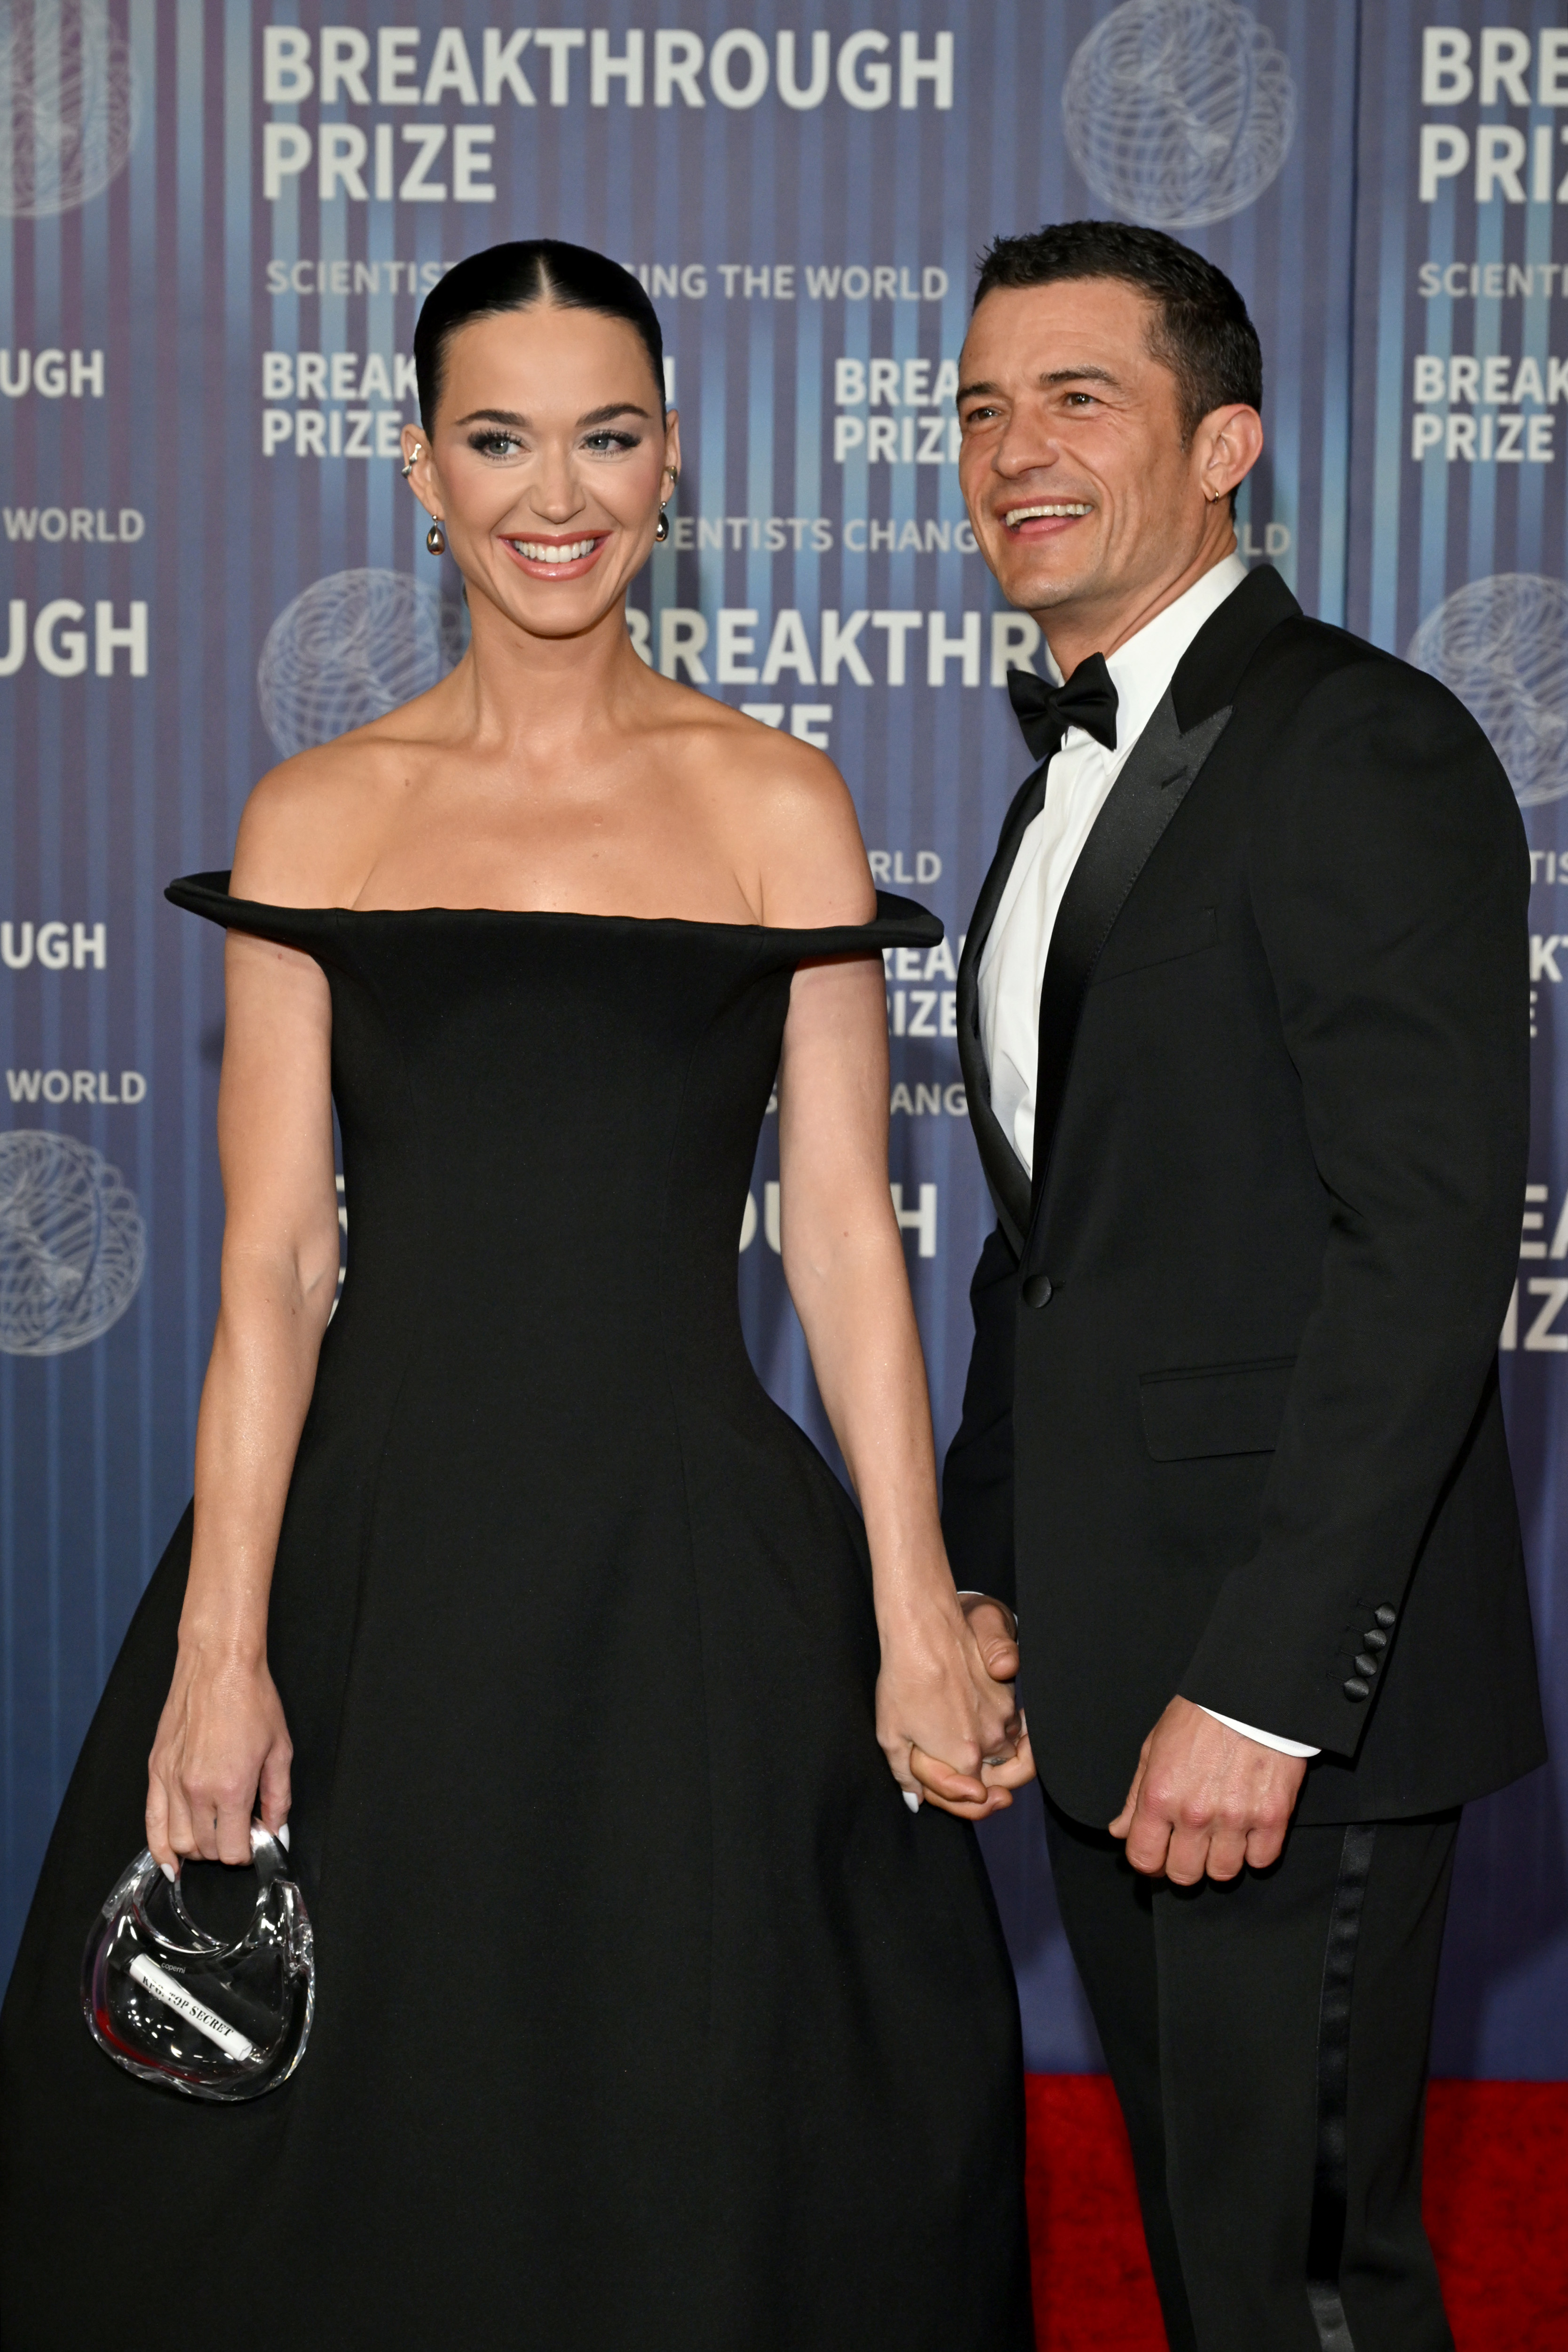 Closeup of Katy Perry and Orlando Bloom holding hands as they smile for photographers on the red carpet